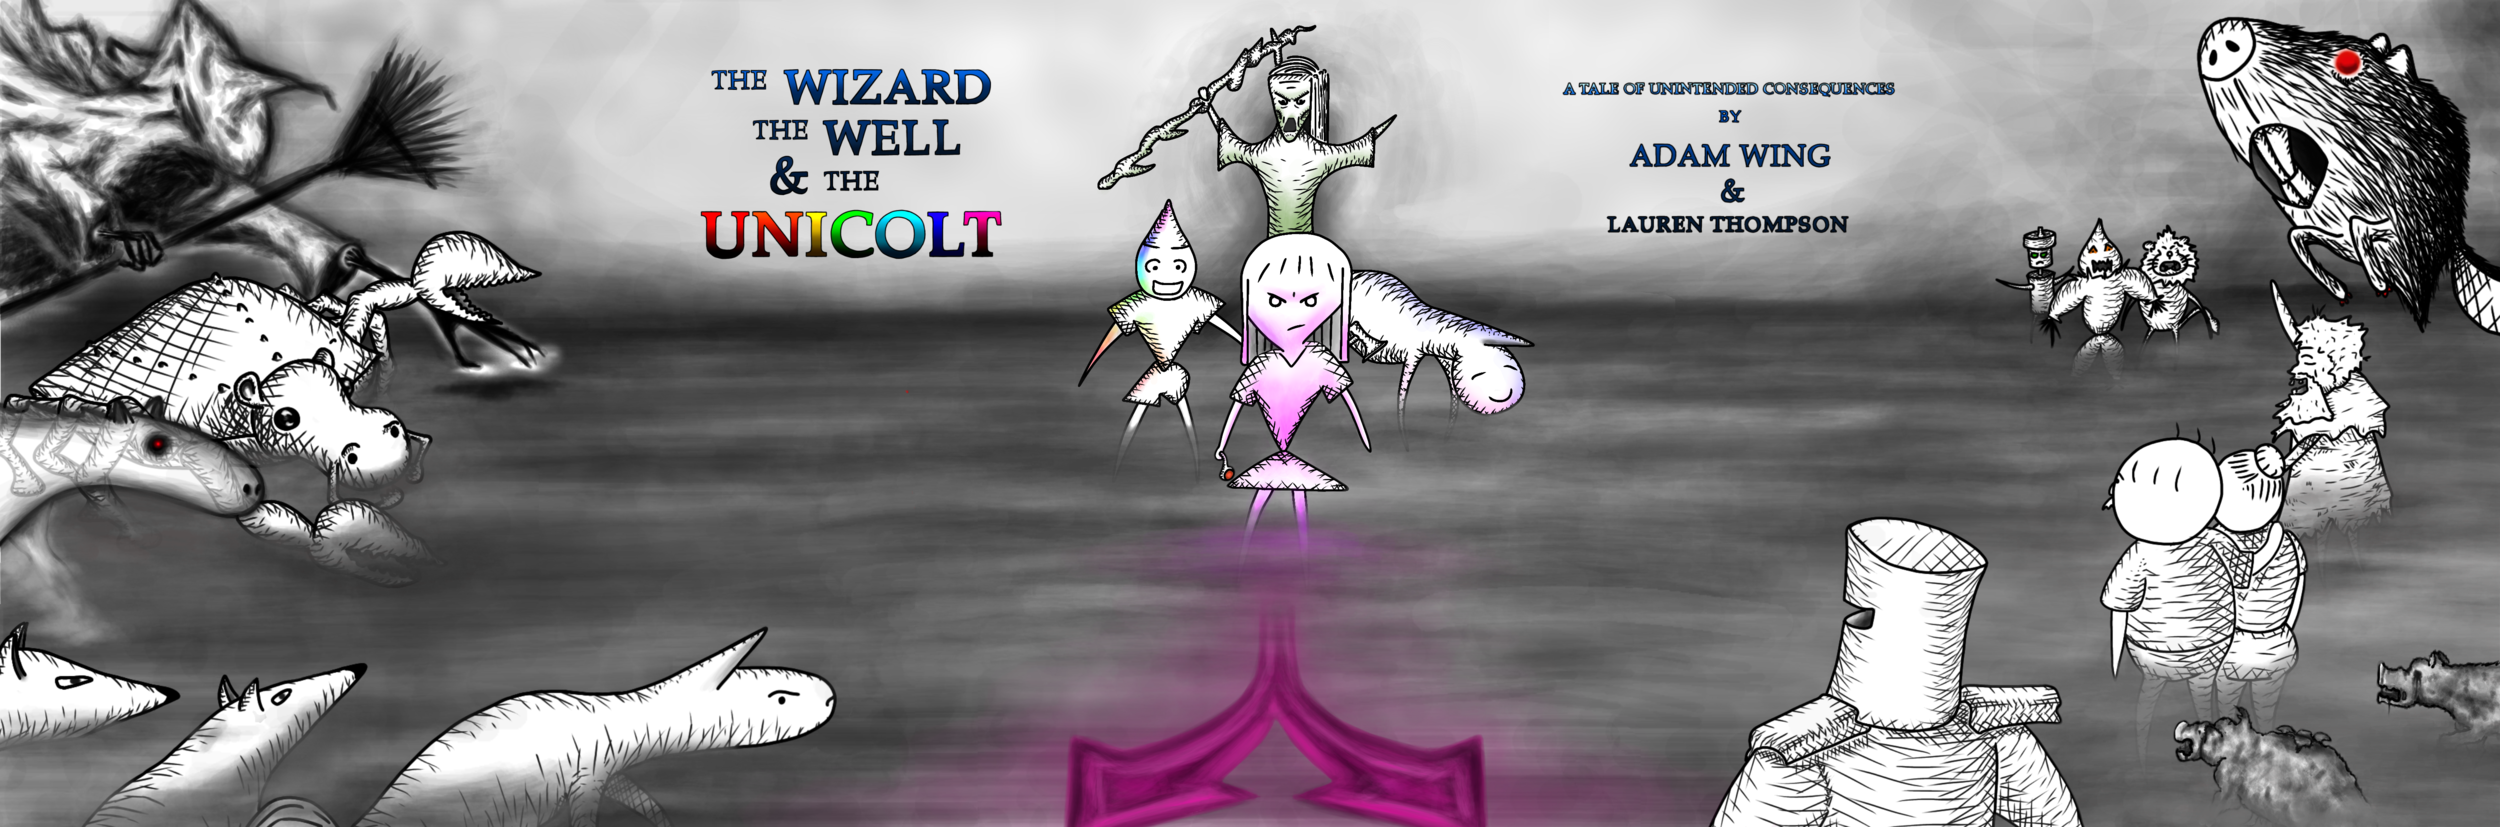 The Wizard, the Well & the Unicolt COVER 7.png